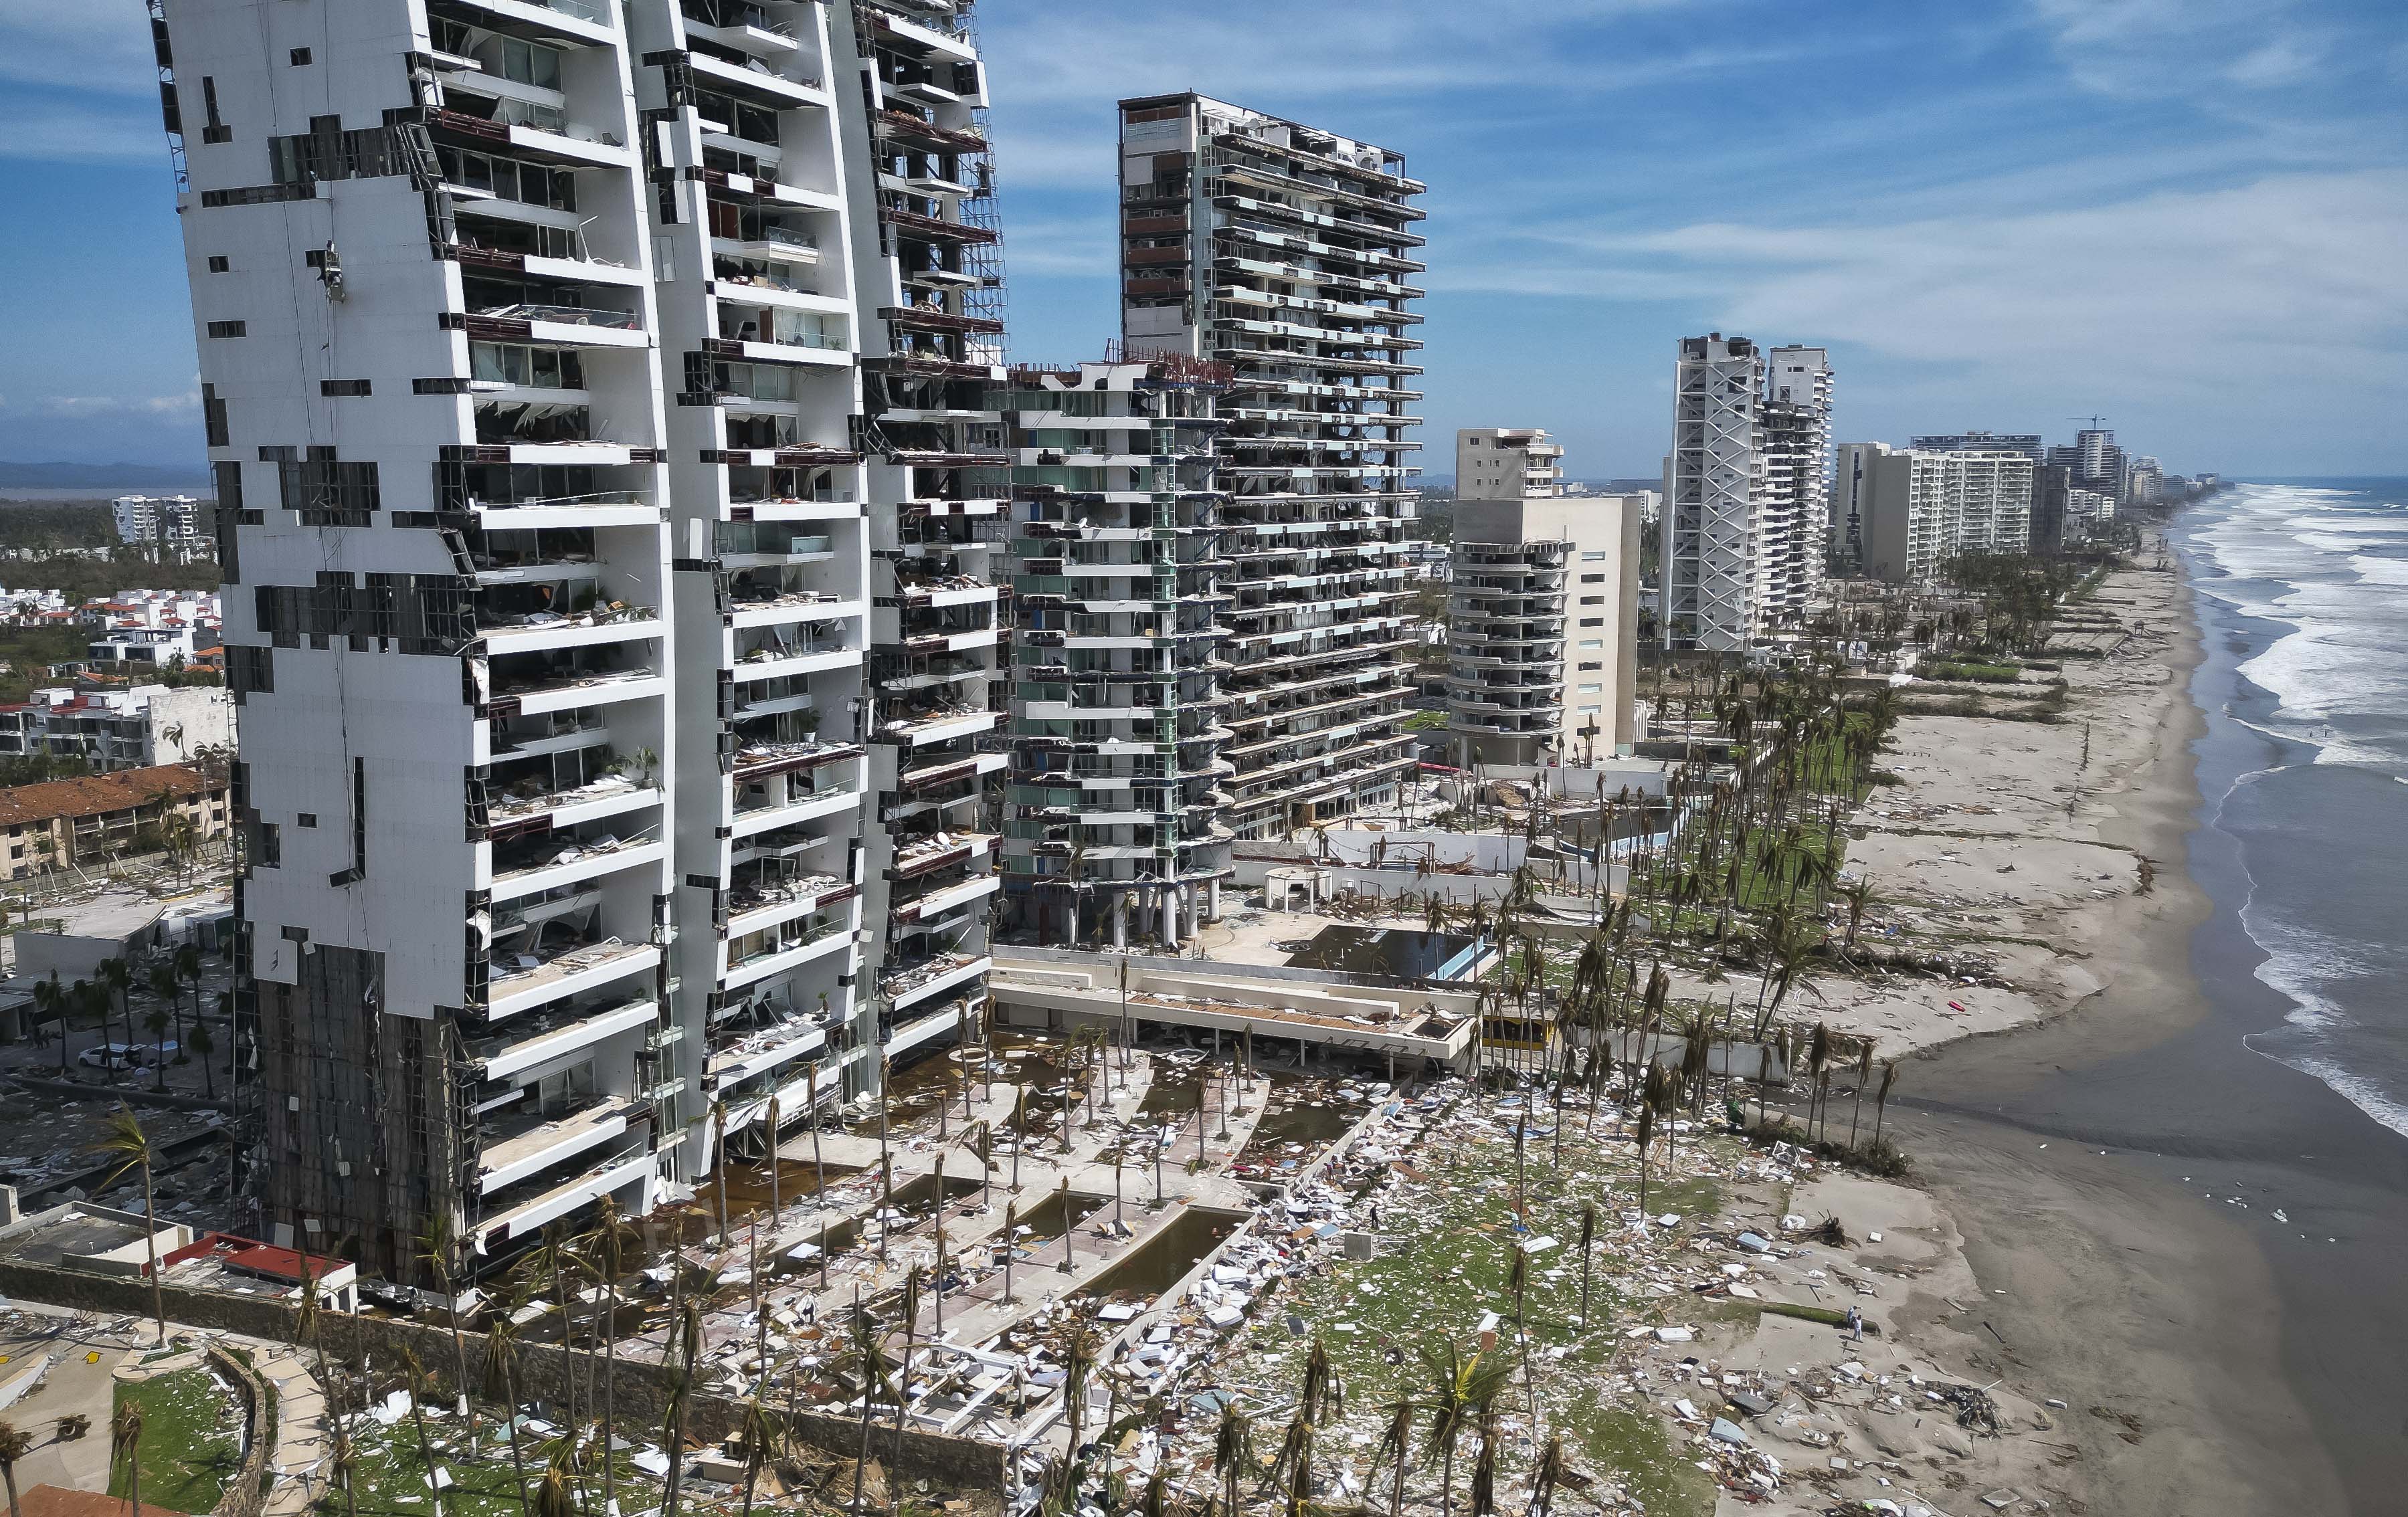 Damage caused by Hurricane Otis in Acapulco, Mexico.